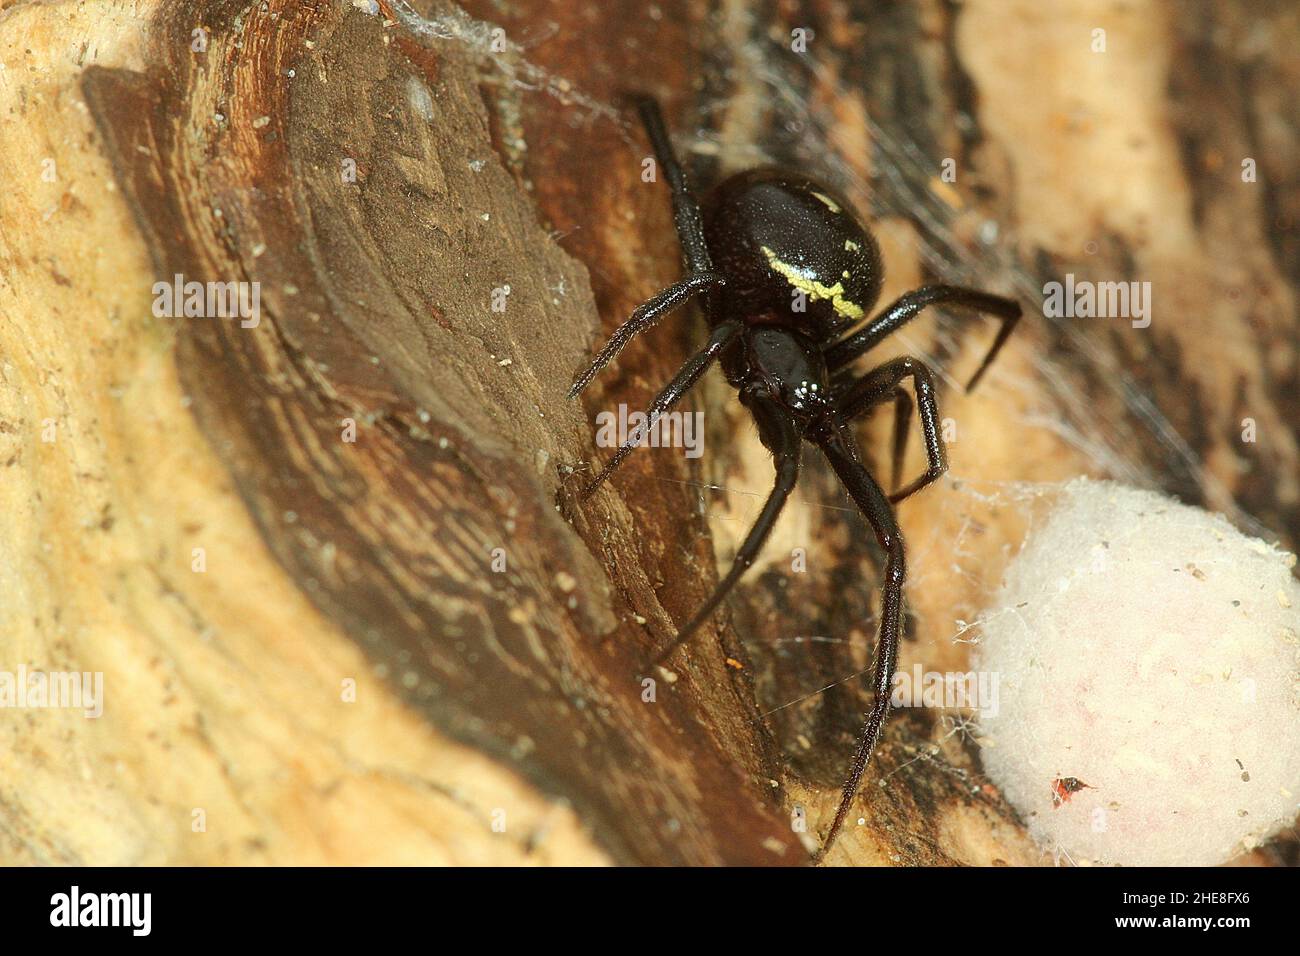 False widow spider (Steatoda capensis) with egg sacs Stock Photo